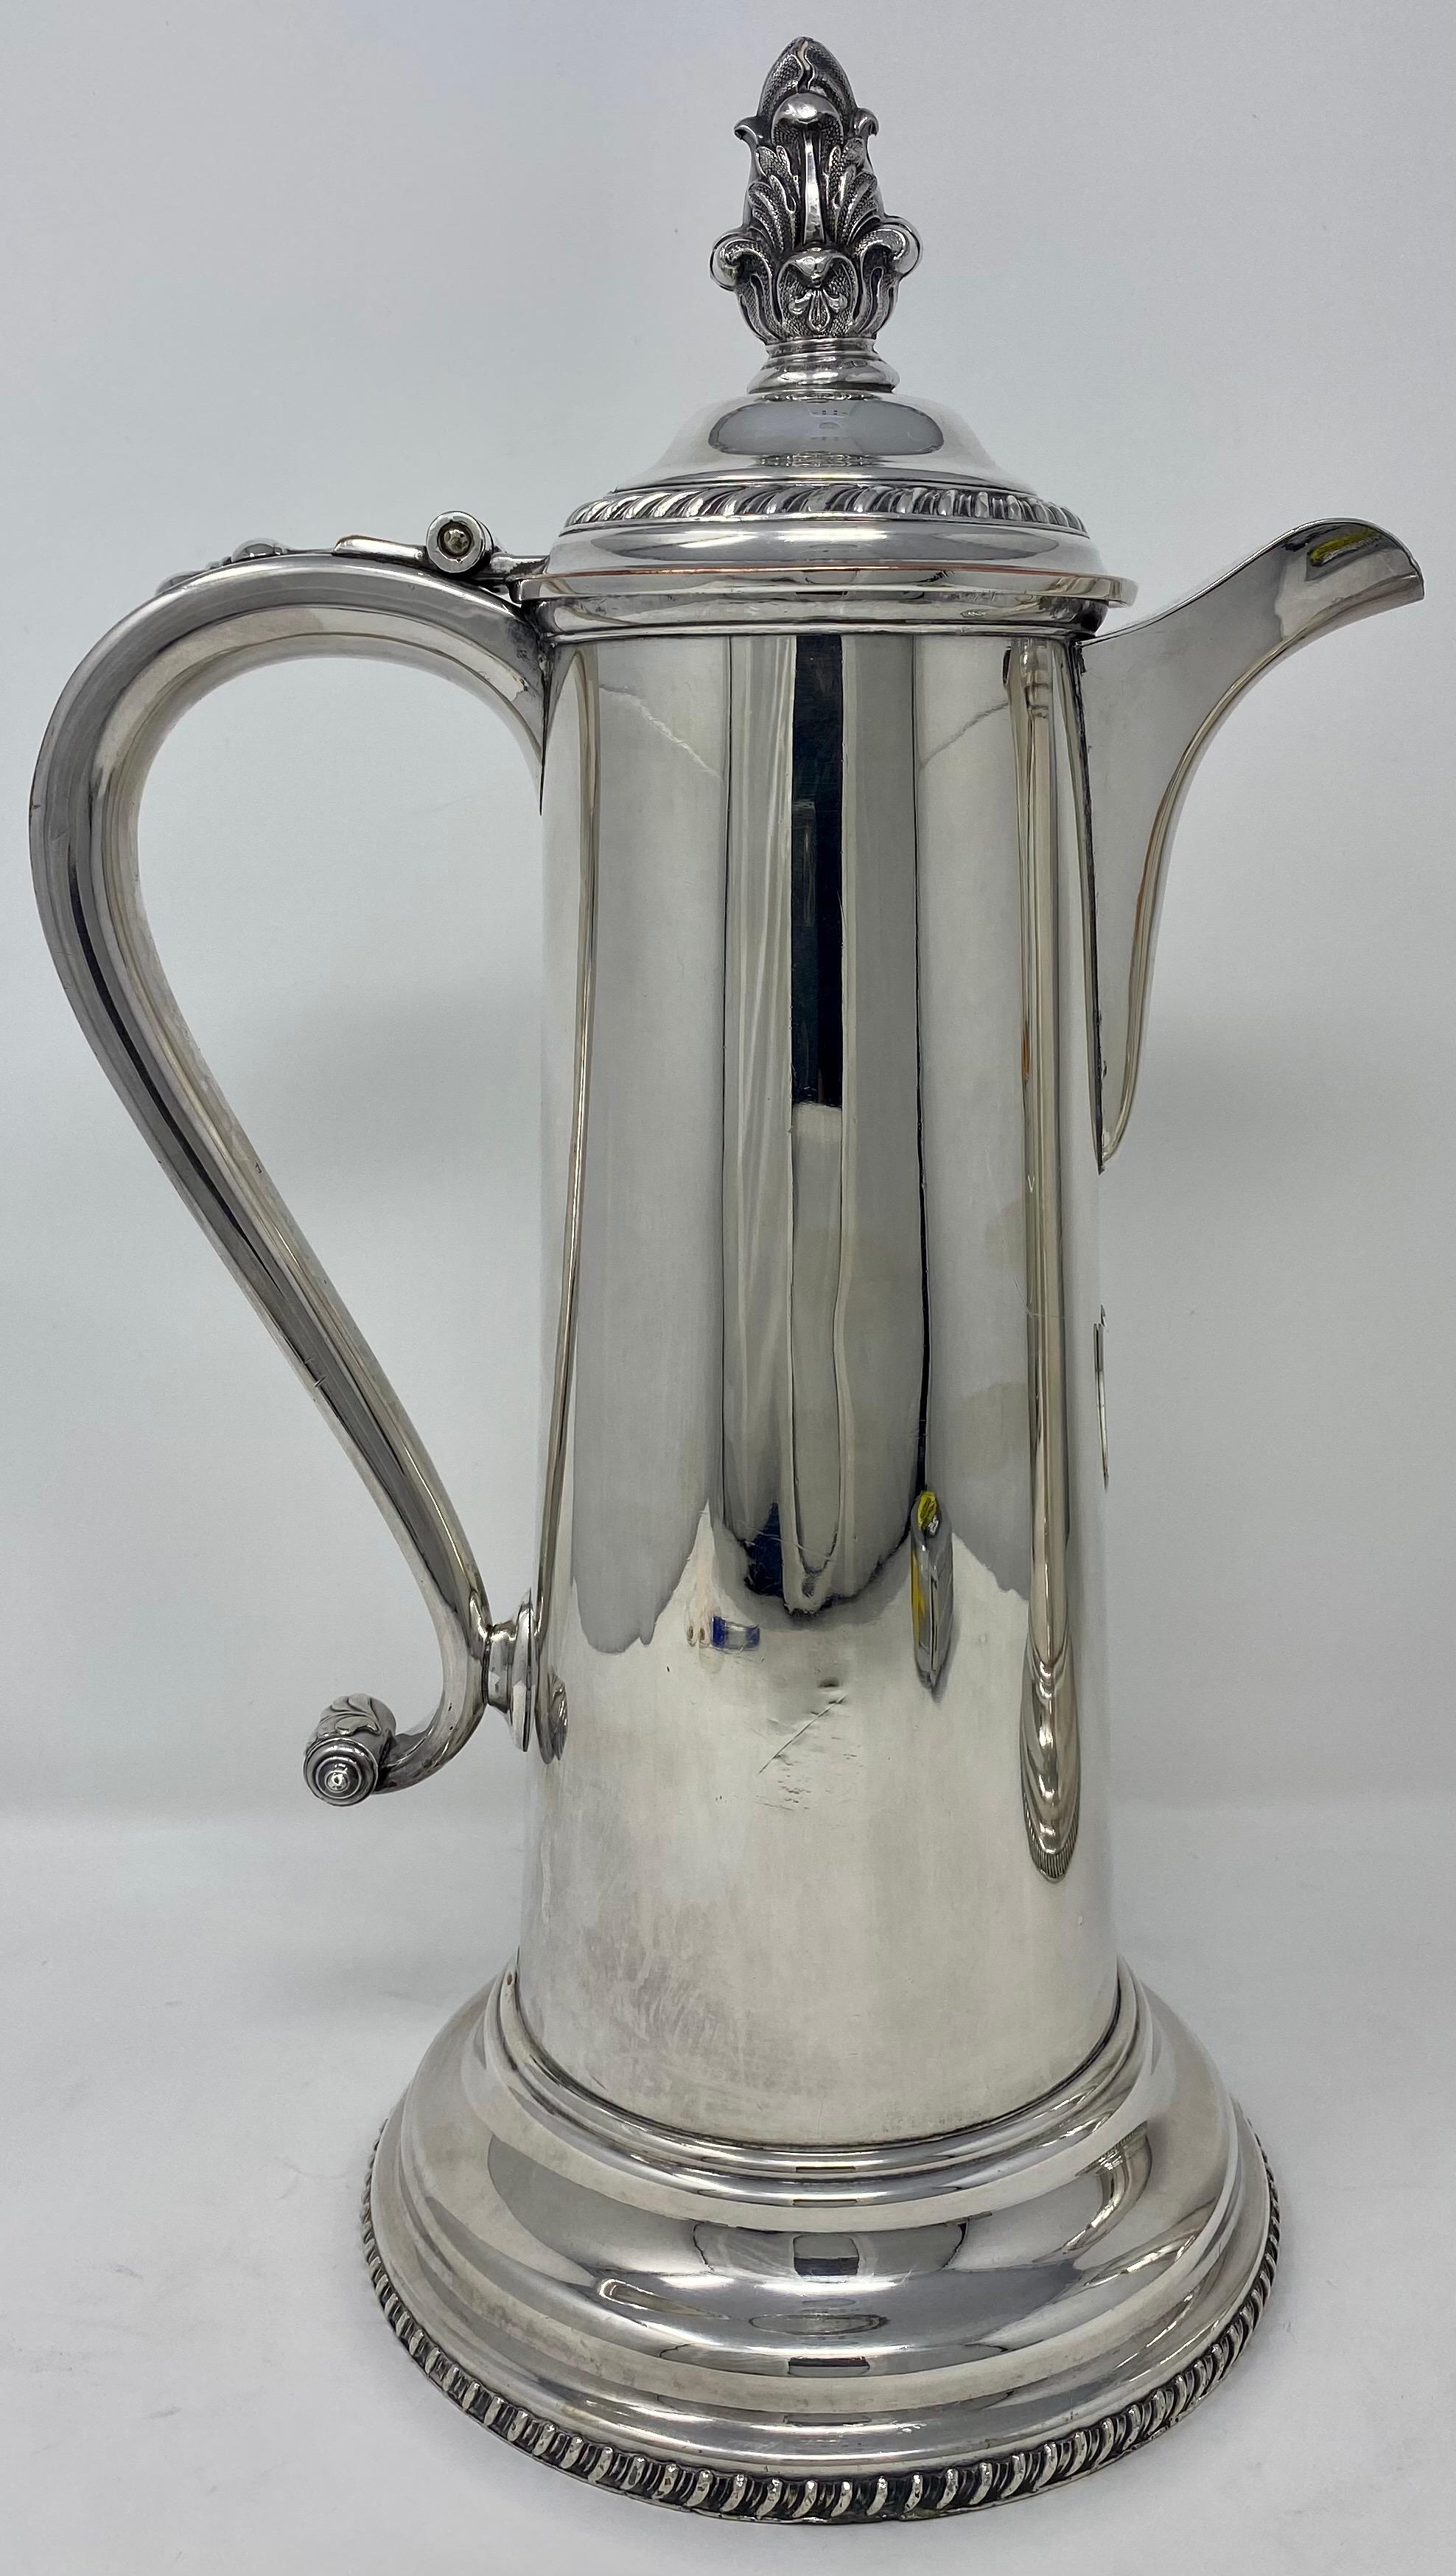 Antique English Victorian silver plated tankard, circa 1870-1890.
This tankard has a mate and is also listed as a matching pair. See reference #LU861921418472.